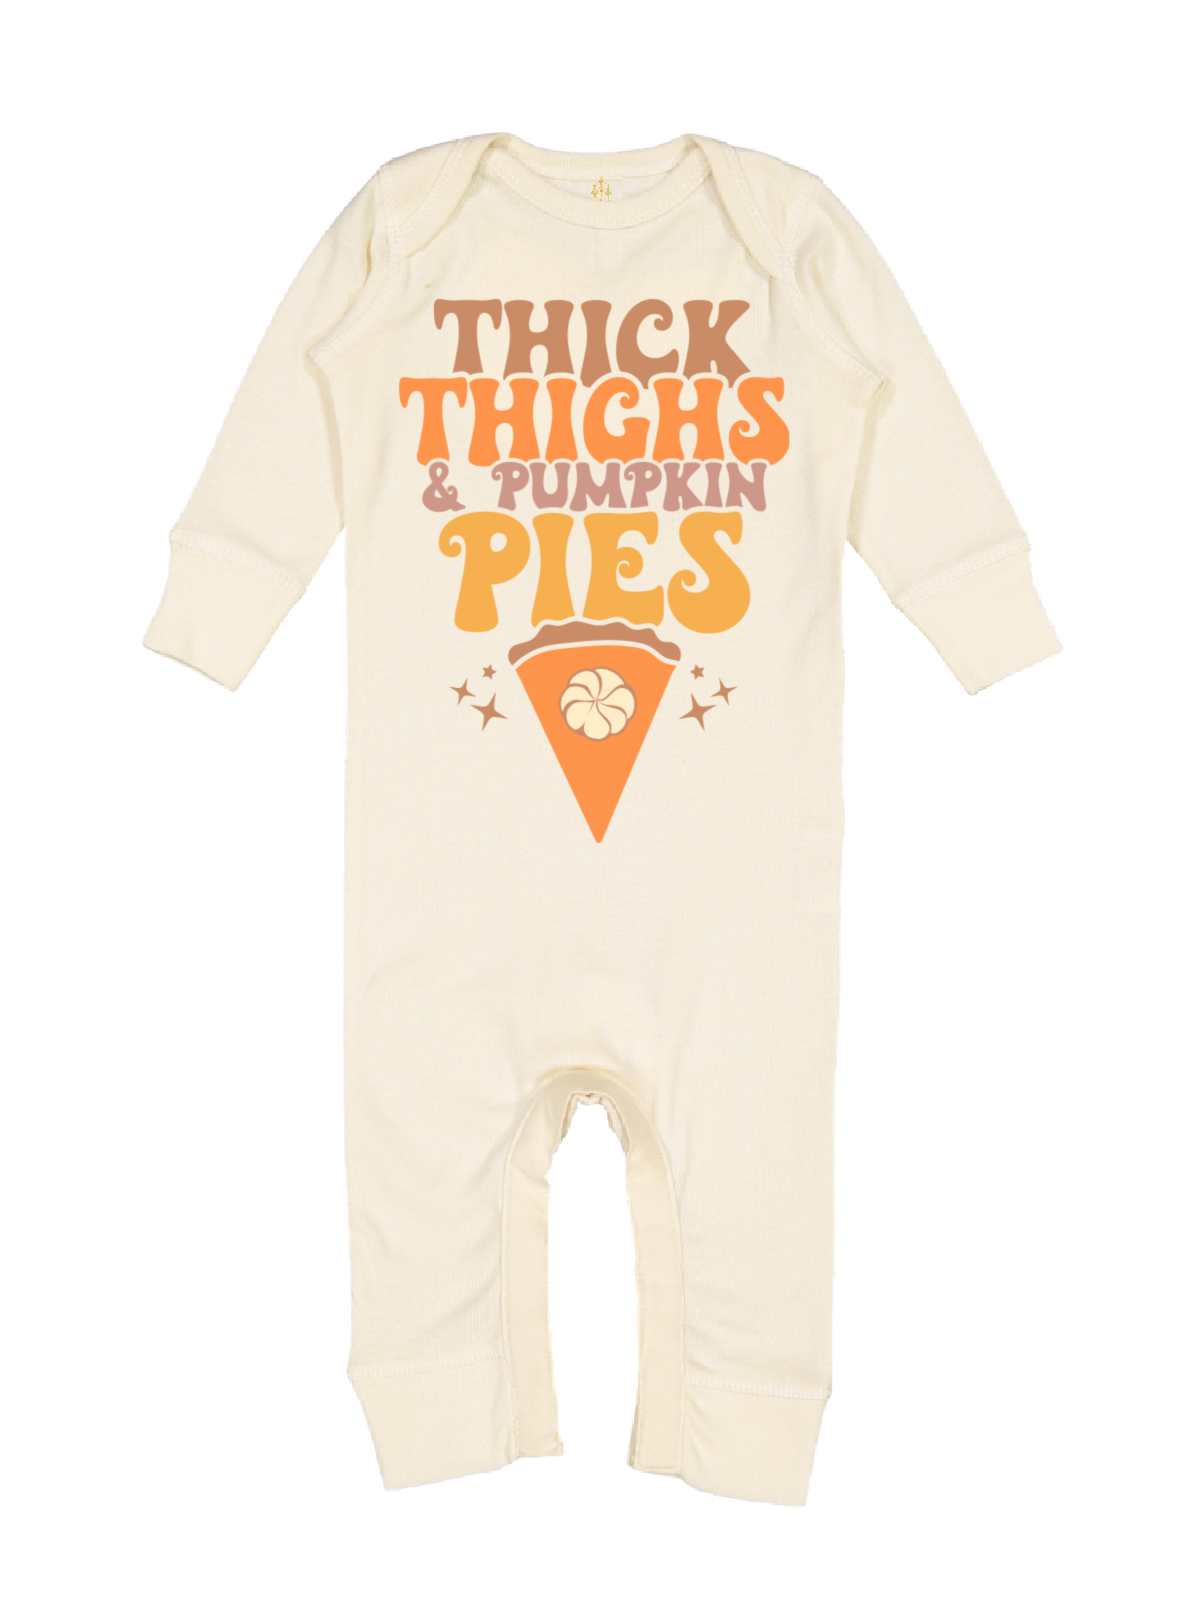 Thick Thighs and Pumpkin Pies Infant Coverall